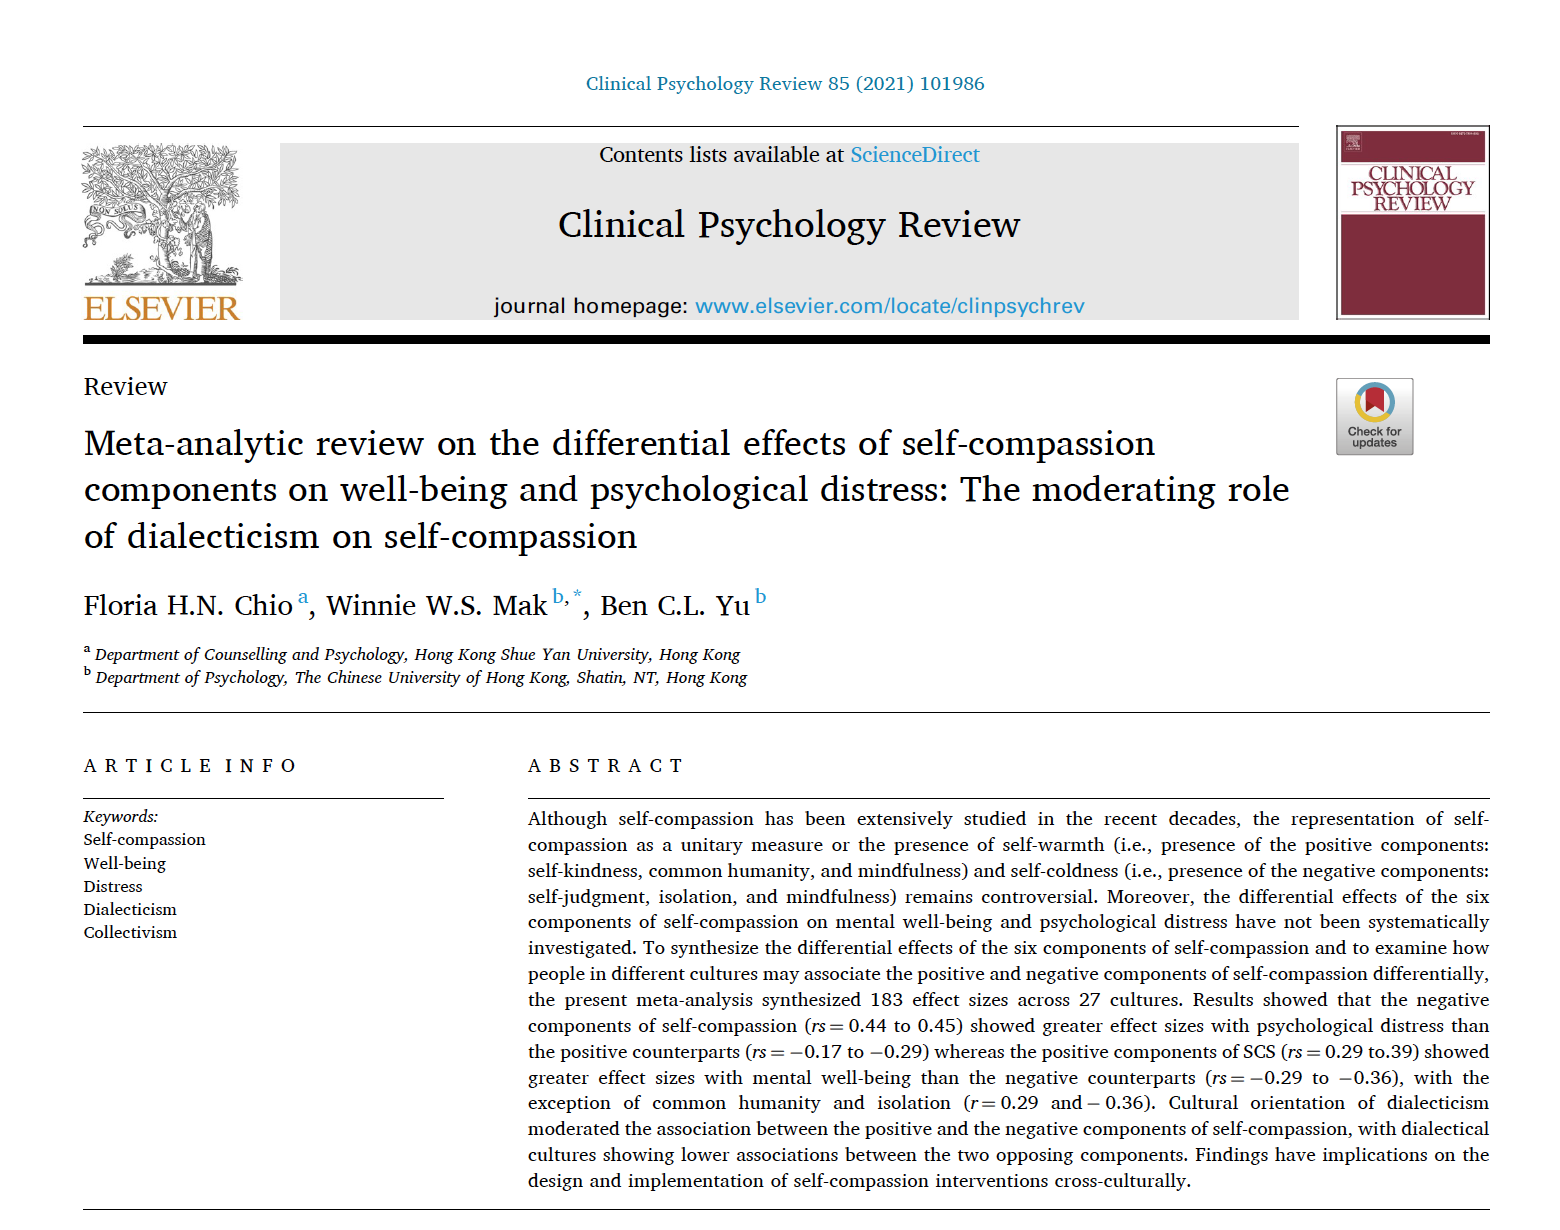 Meta-analytic review of self-compassion